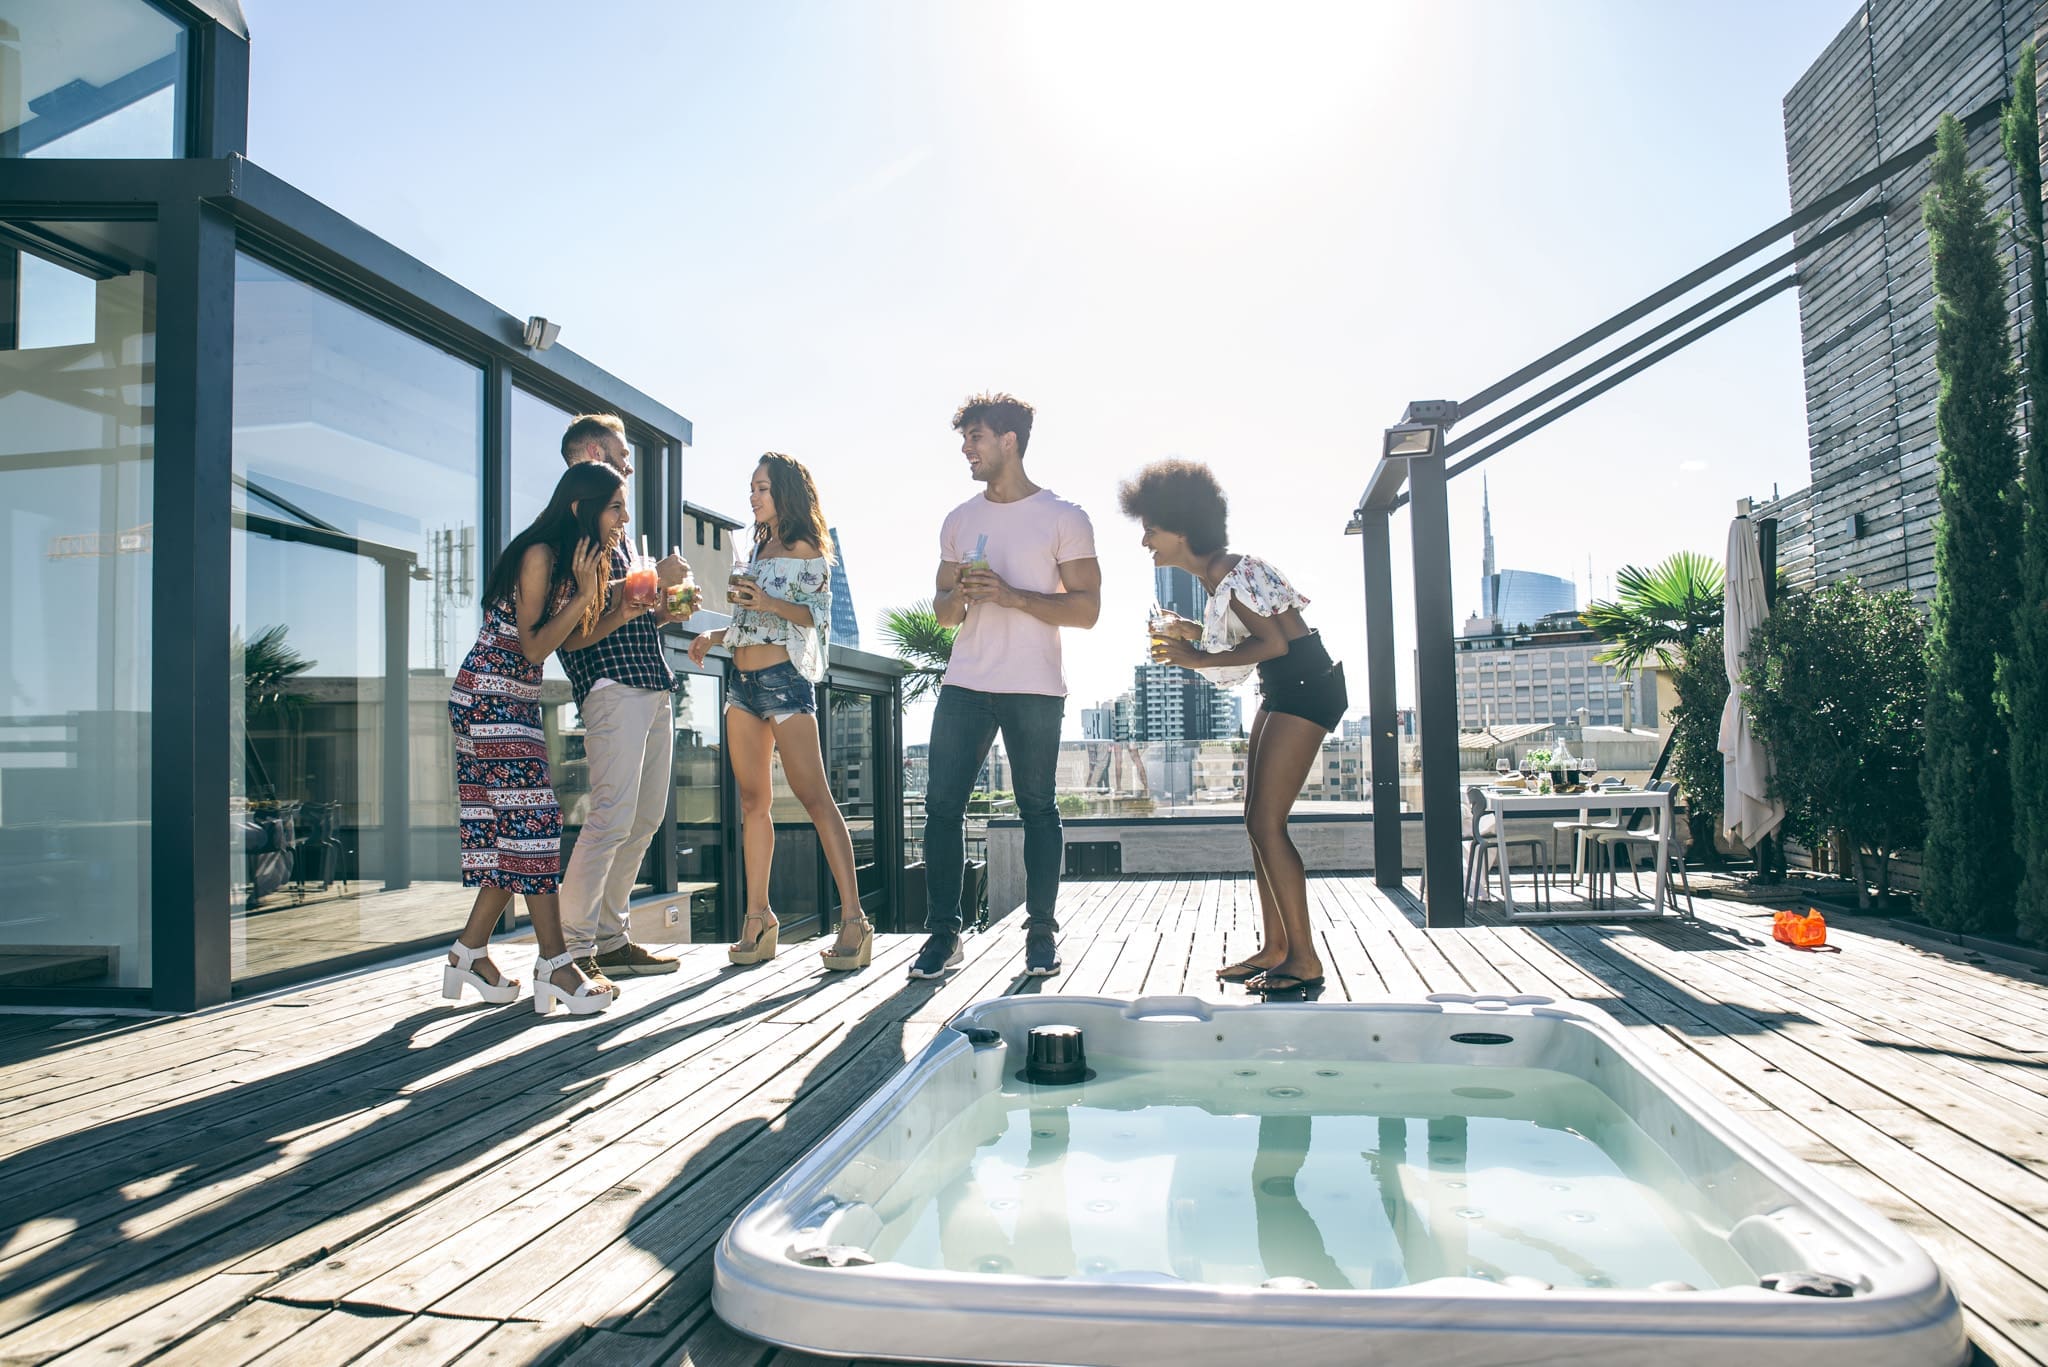 Group of friends enjoying a rooftop party beside an empty hot tub with city skyline in the background.